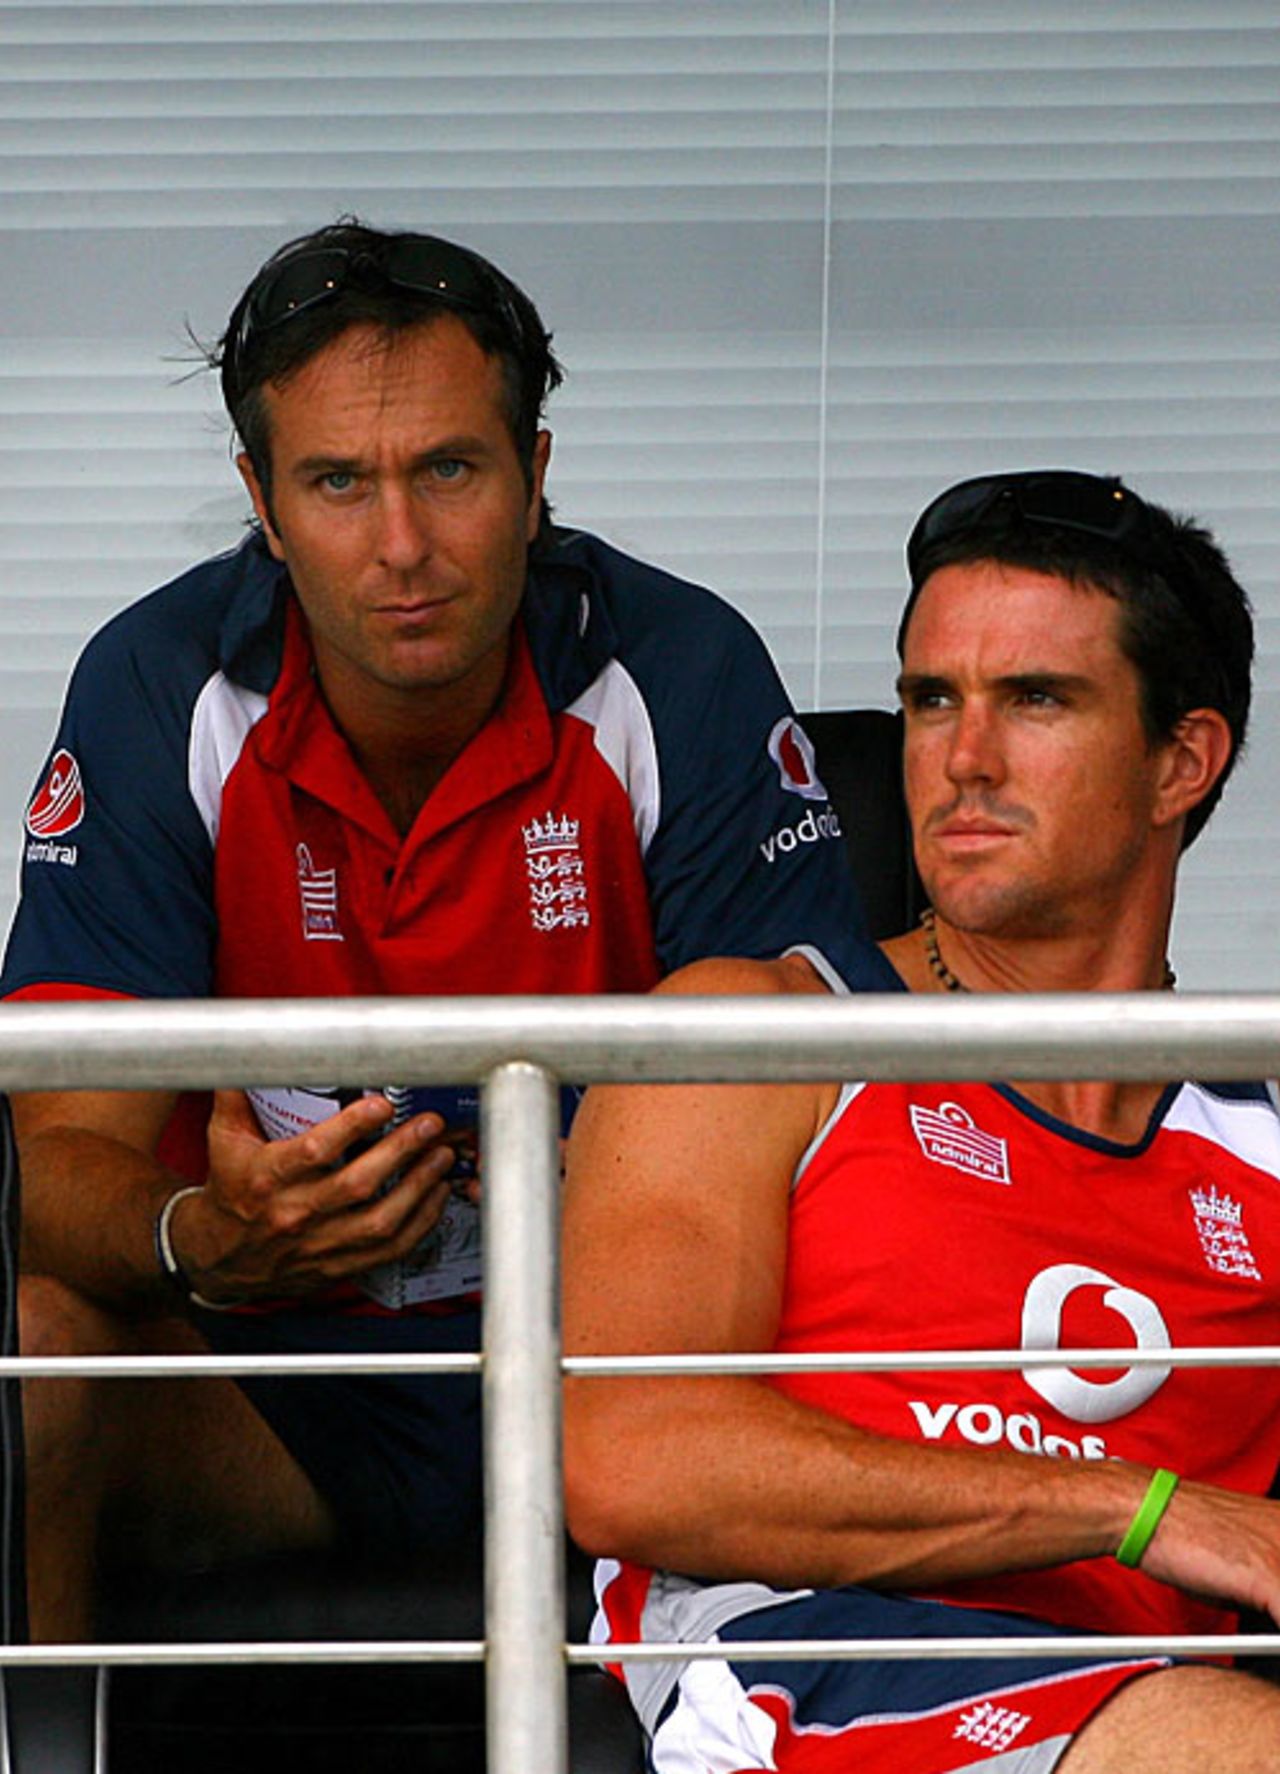 Michael Vaughan and Kevin Pietersen cut disconsolate figures as England's dismal series finally draws to an end, Sri Lanka v England, 3rd Test, Galle, 5th day, December 22 2007